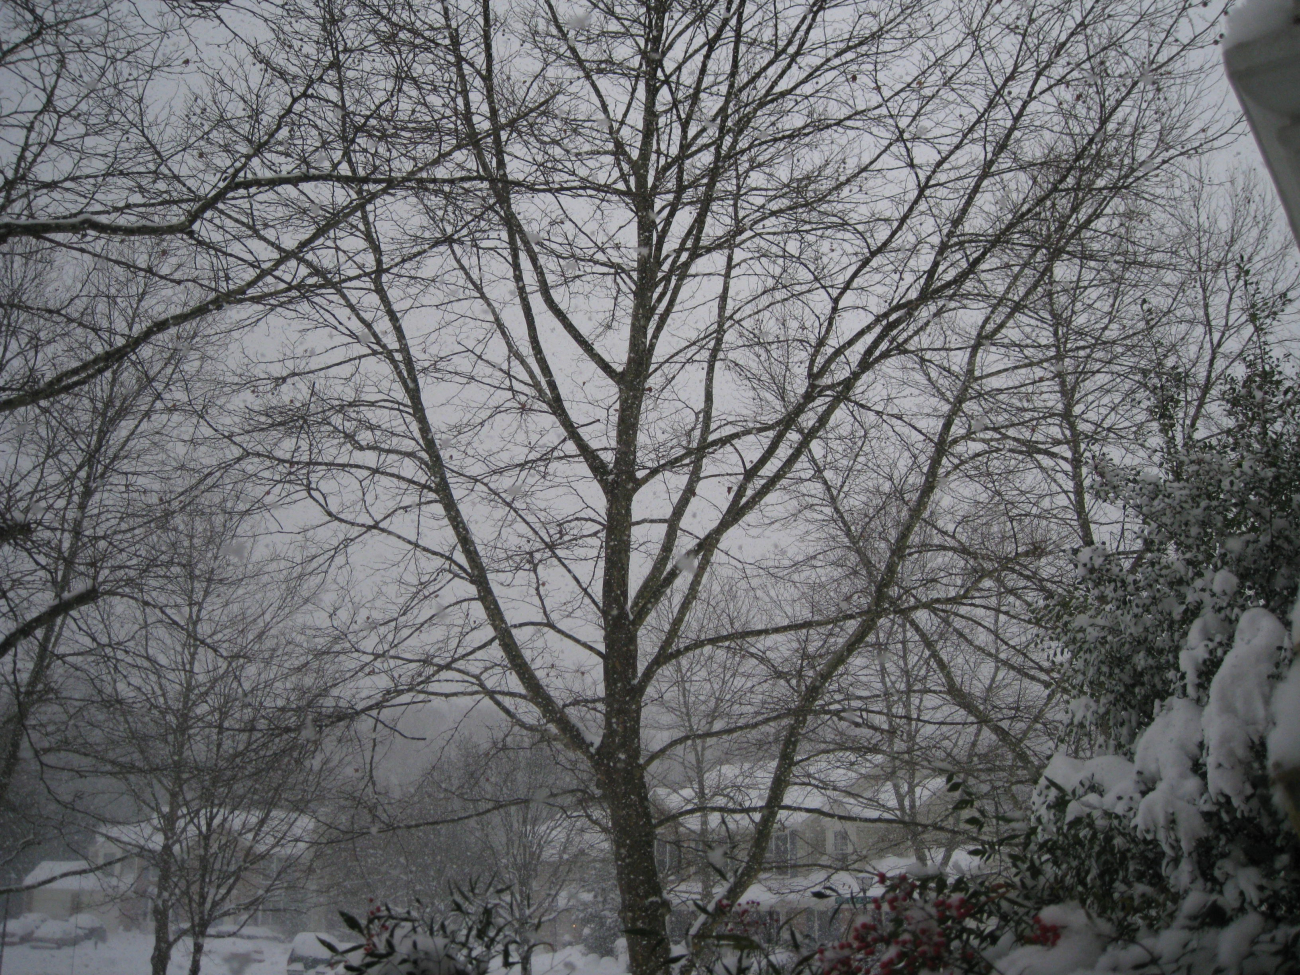 Gray sky and a profusion of tree branches and snow